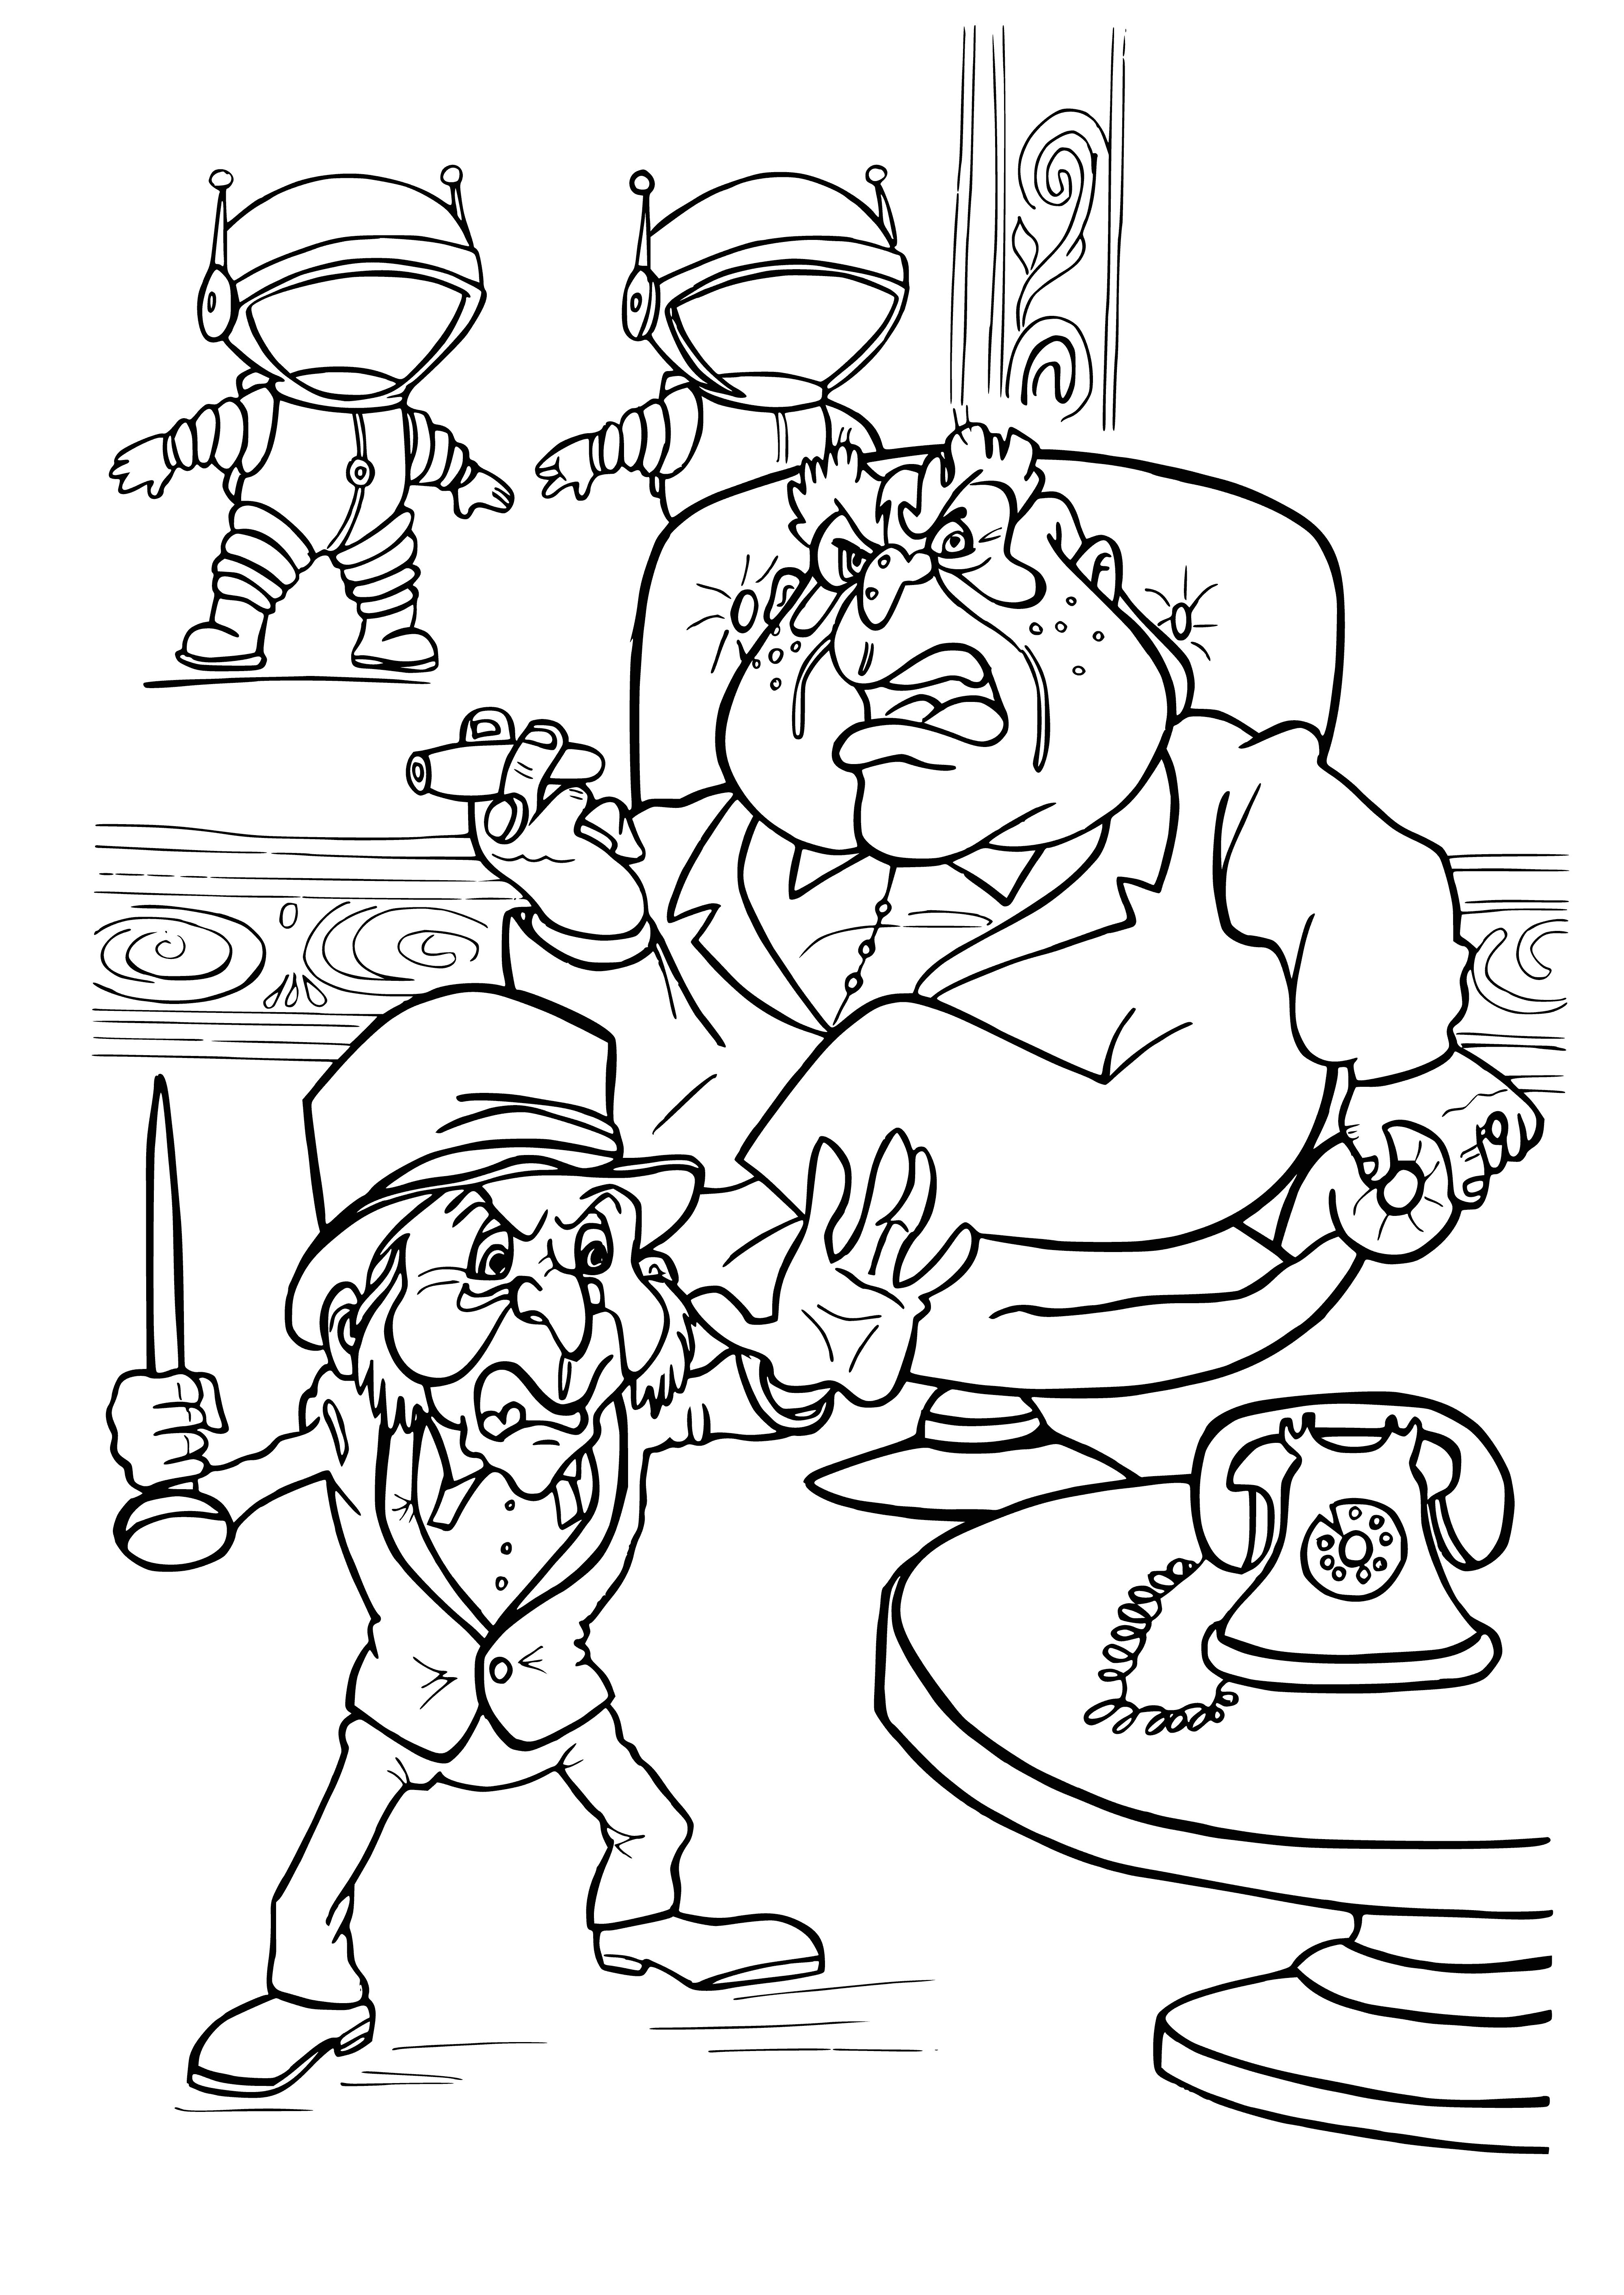 coloring page: A boy is fishing with a helmet on the moon, catching a happy surprise.